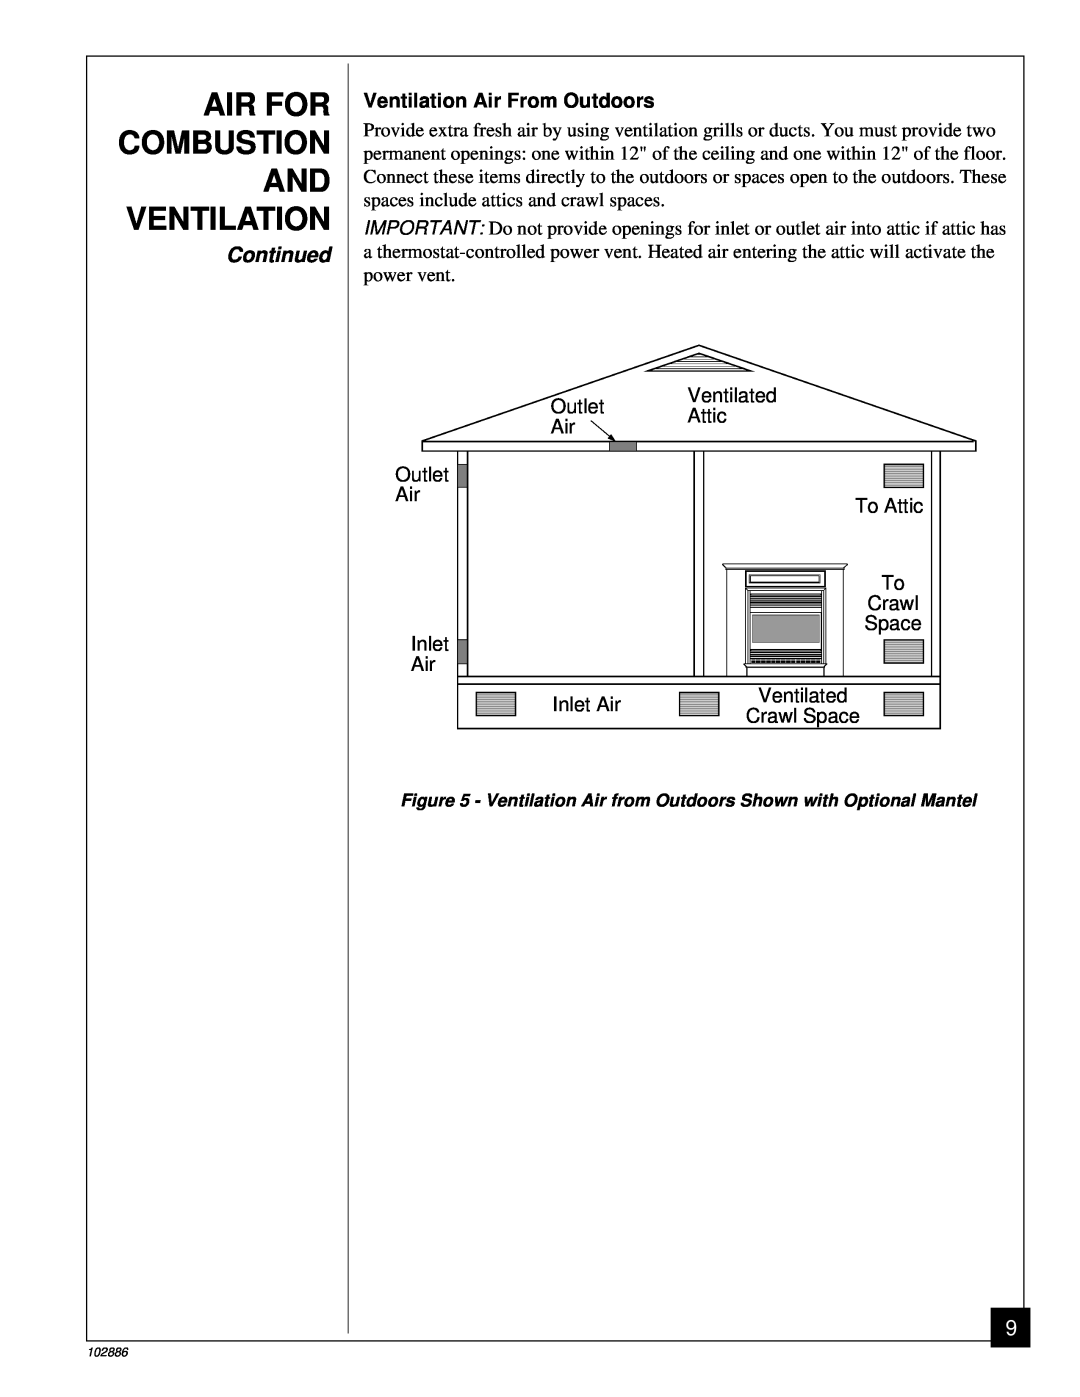 Vanguard Heating VMH26TPB Air For Combustion And Ventilation, Continued, Ventilation Air From Outdoors, Outlet, To Attic 